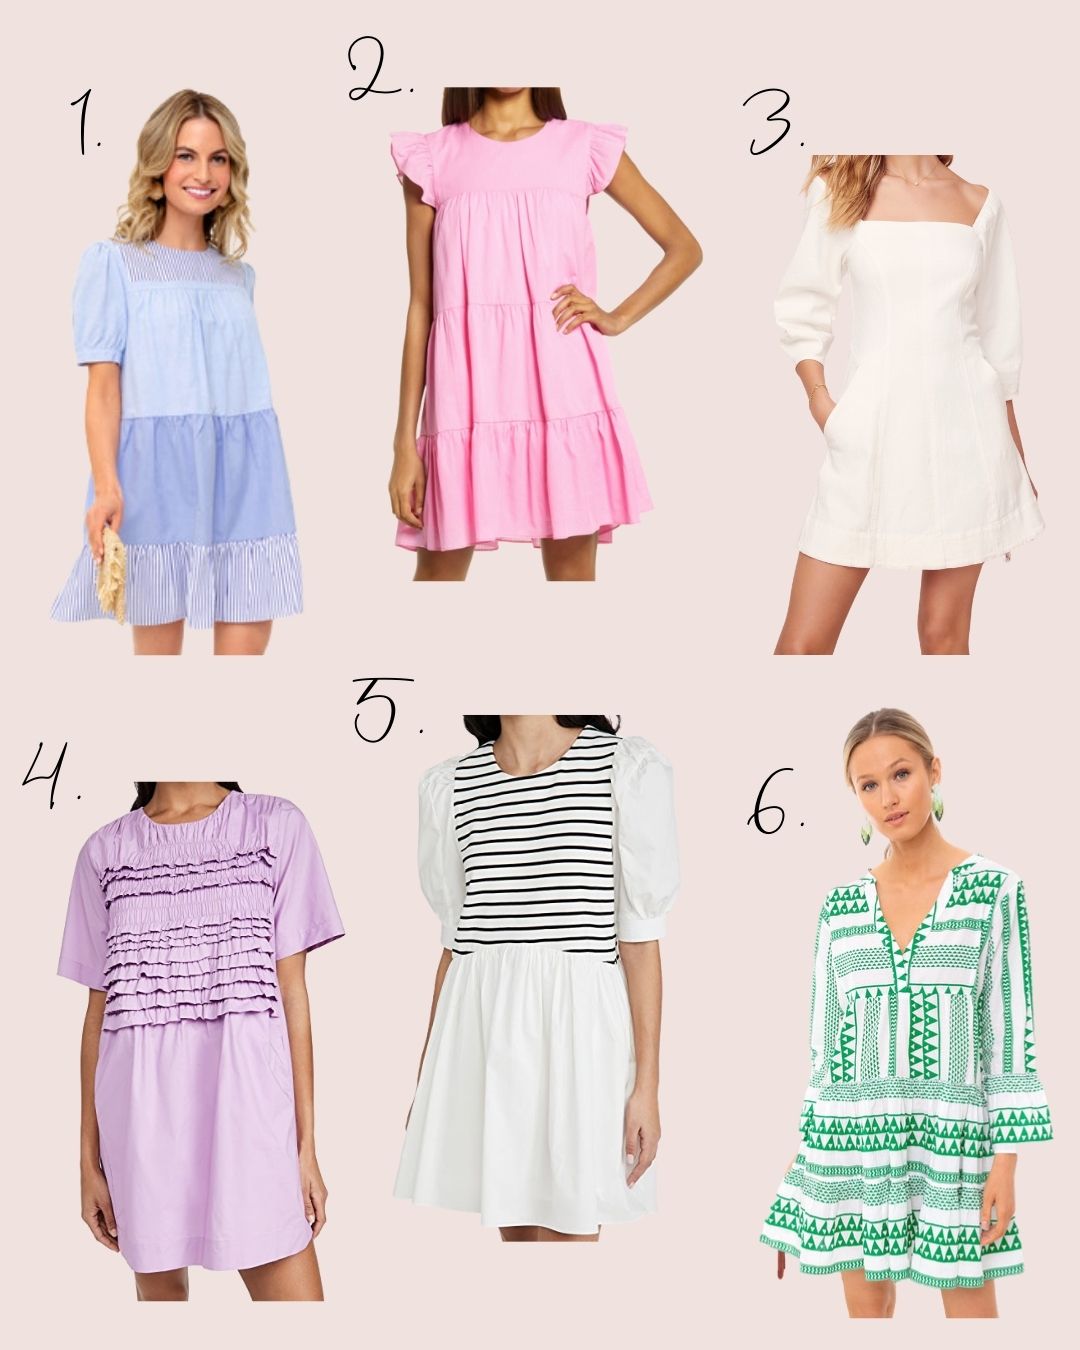 Easter dresses picked by Brighton Butler